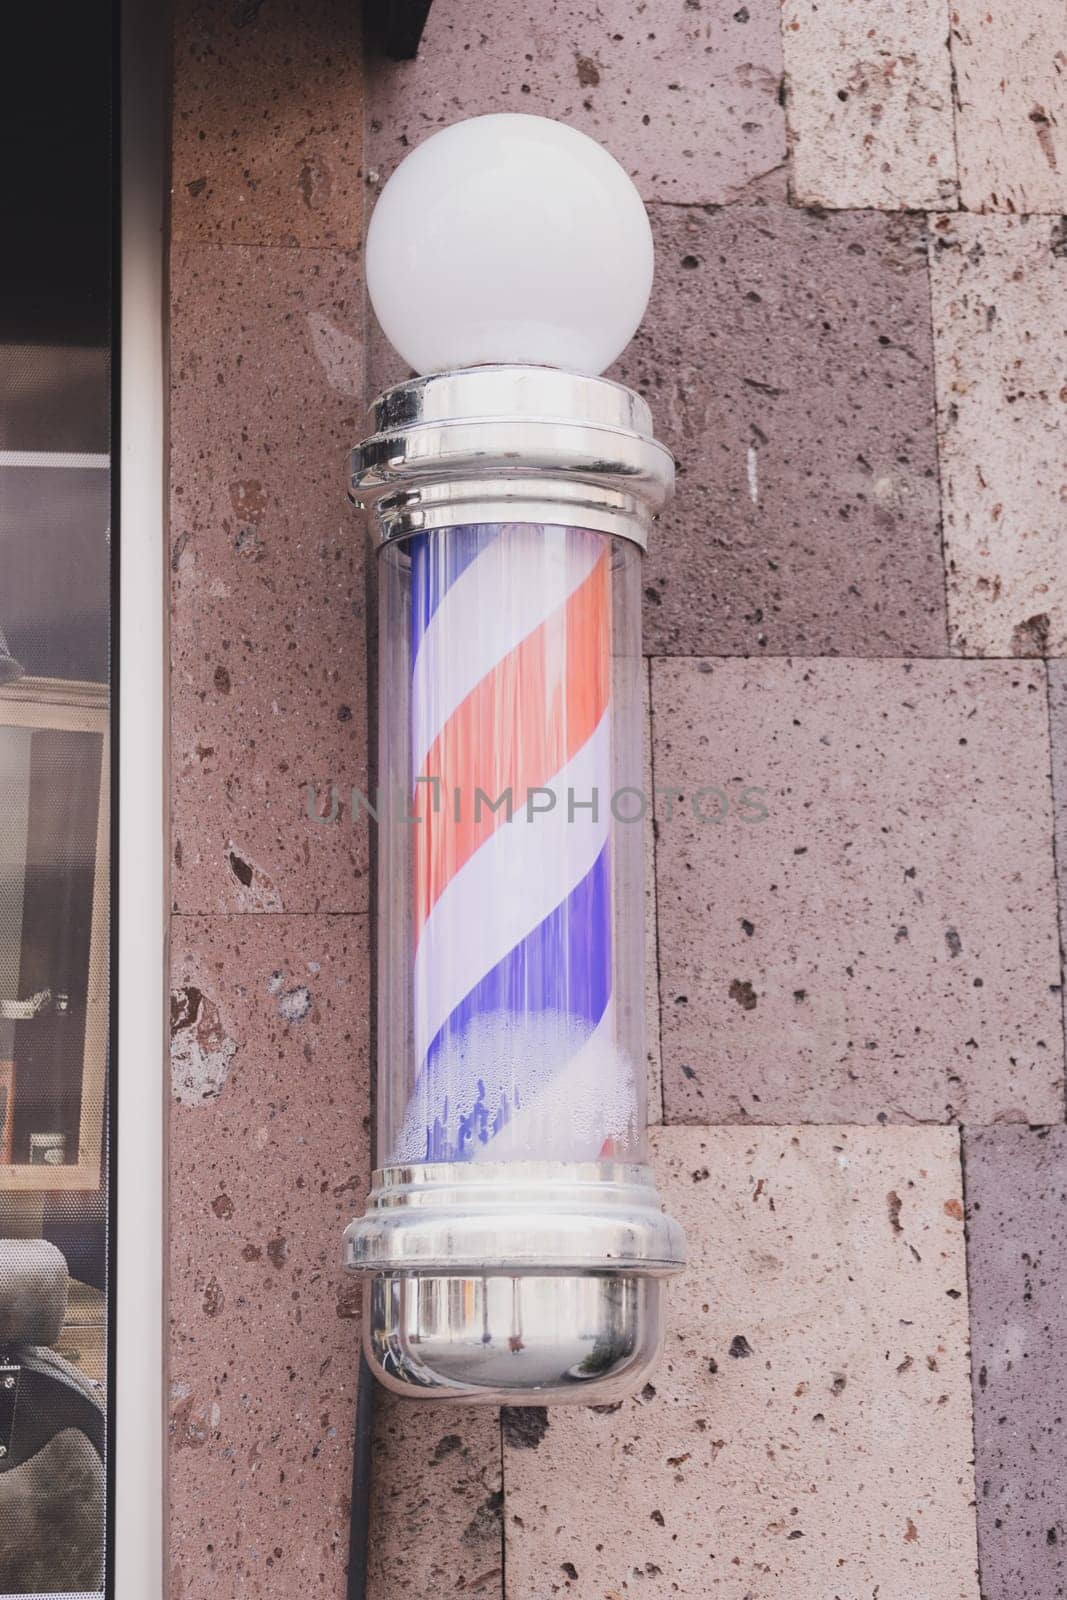 Barber sign and male hairdresser pole or staff mounted on wall. Helix of colored stripes red white and blue.